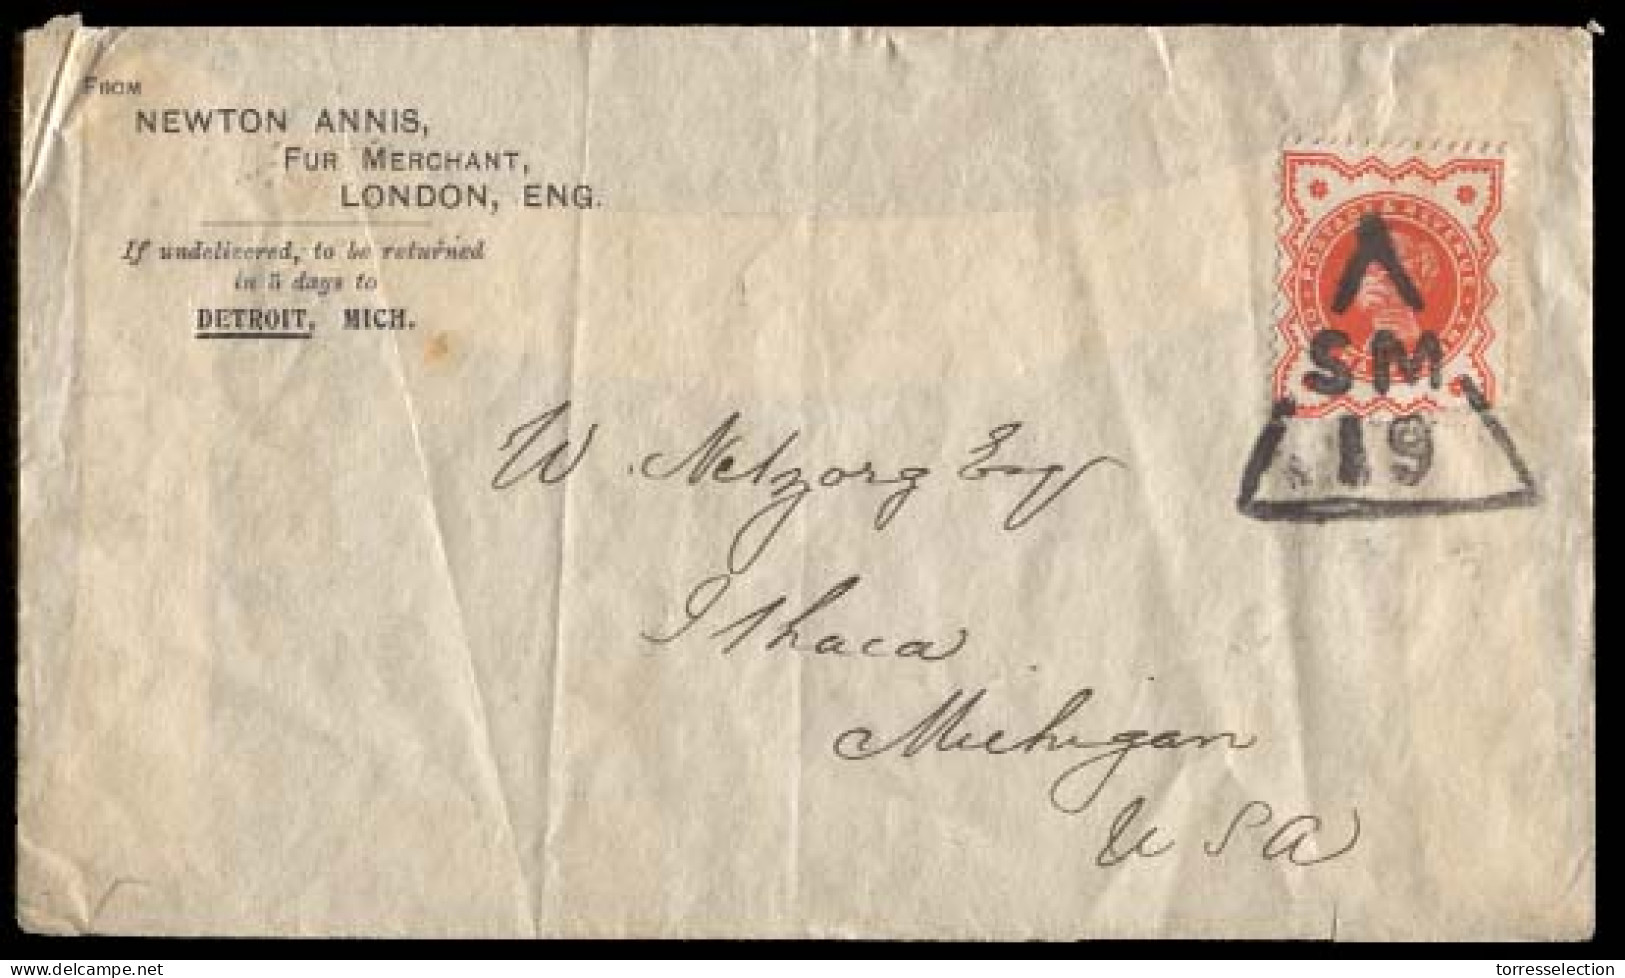 GREAT BRITAIN. C.1887. London To Ithaca, MI, USA. Illustrated Envelope Franked QV 1/2d Orange (SG 197) Single Franking A - ...-1840 Voorlopers